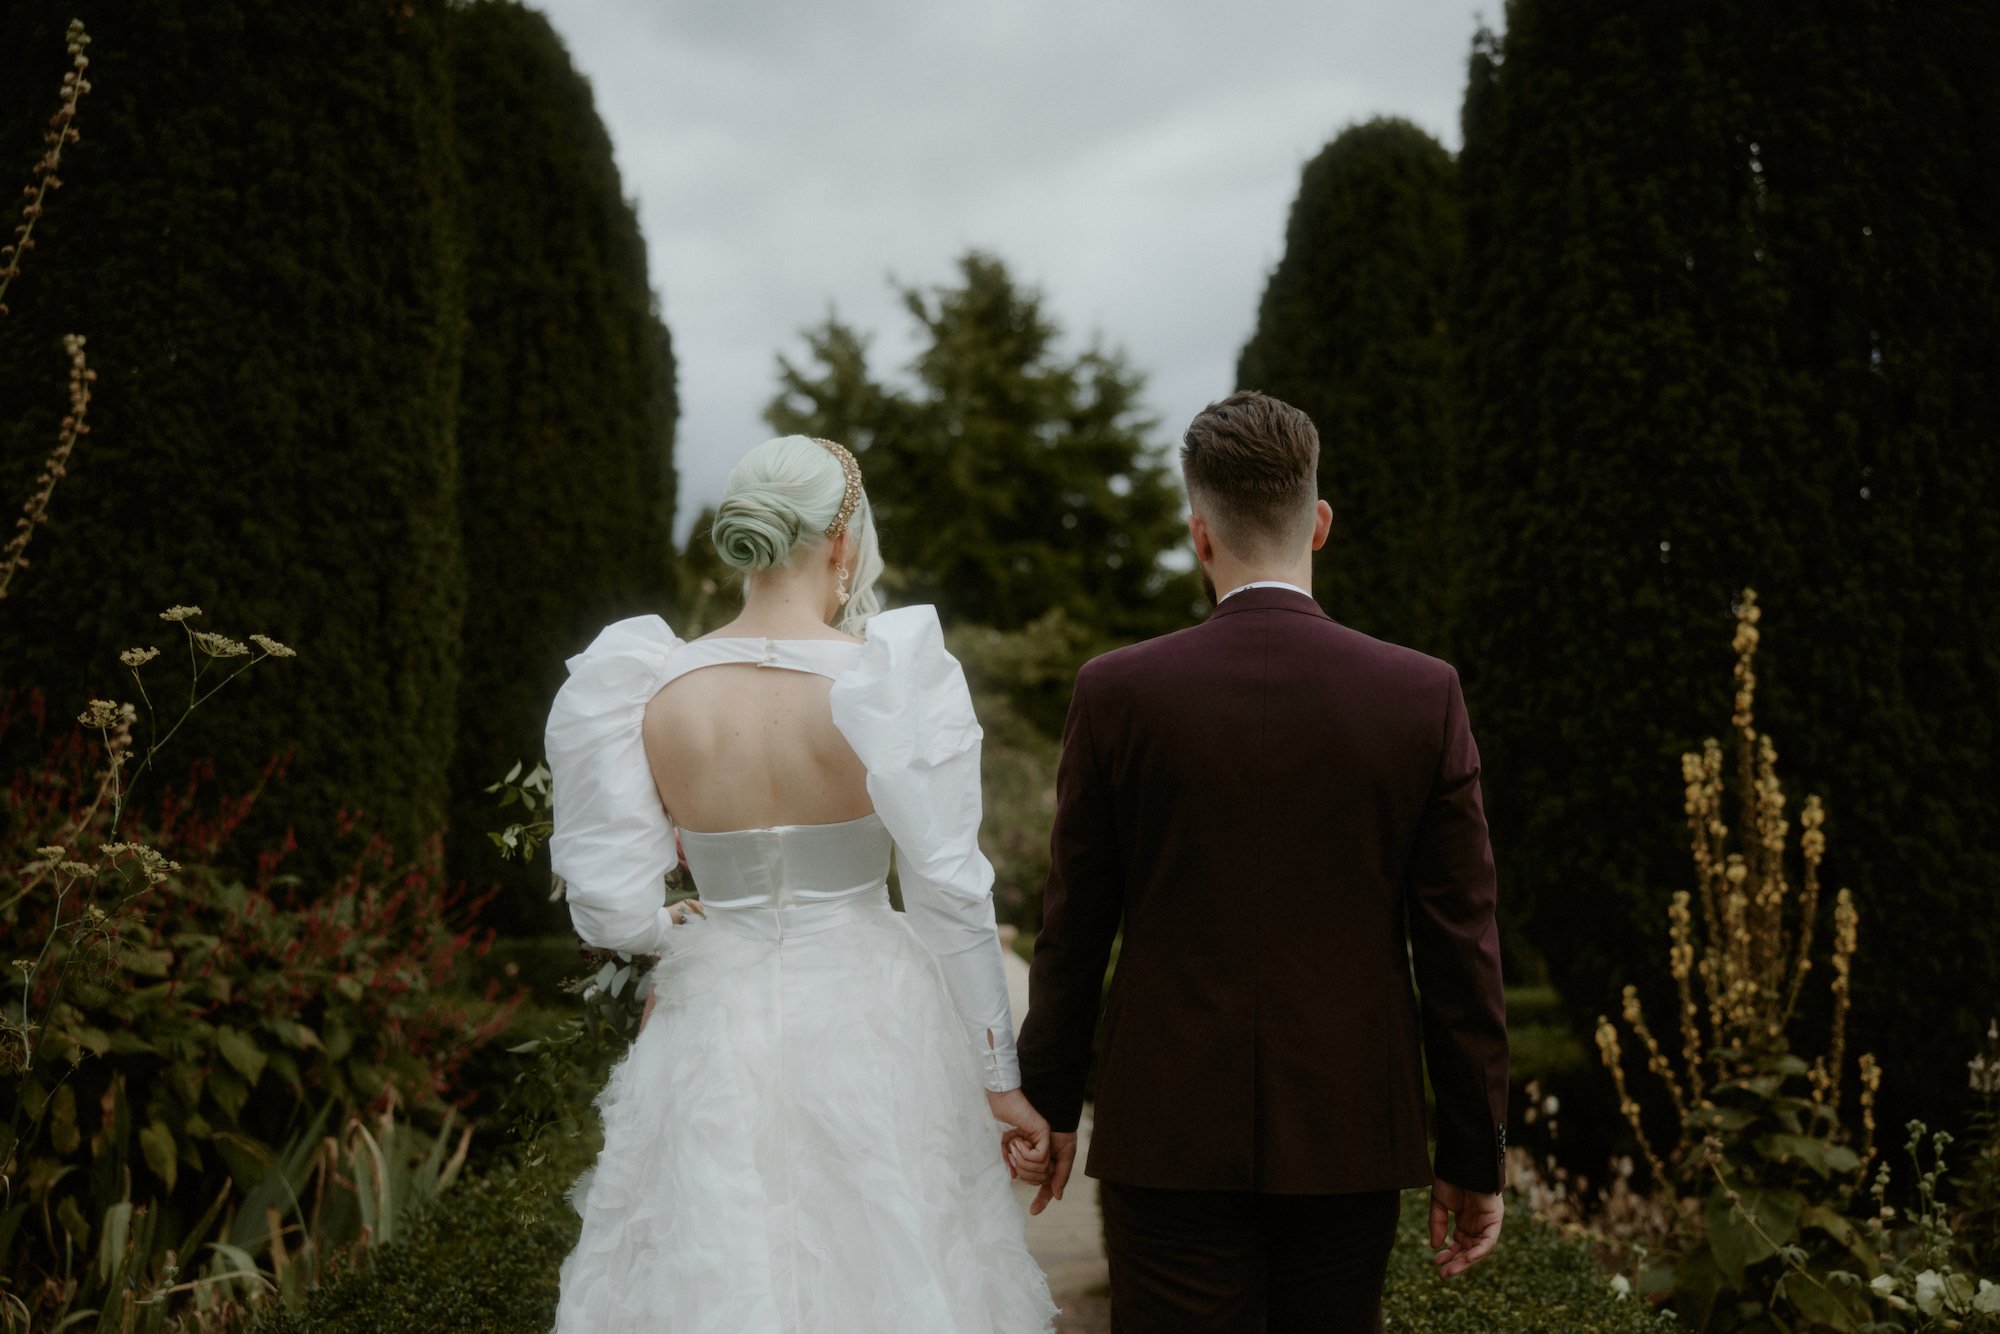 Beautiful bride Claire wore the Ruffle Rose Skirt, Mars Sleeves and a bespoke corset by Halfpenny London for her wedding day